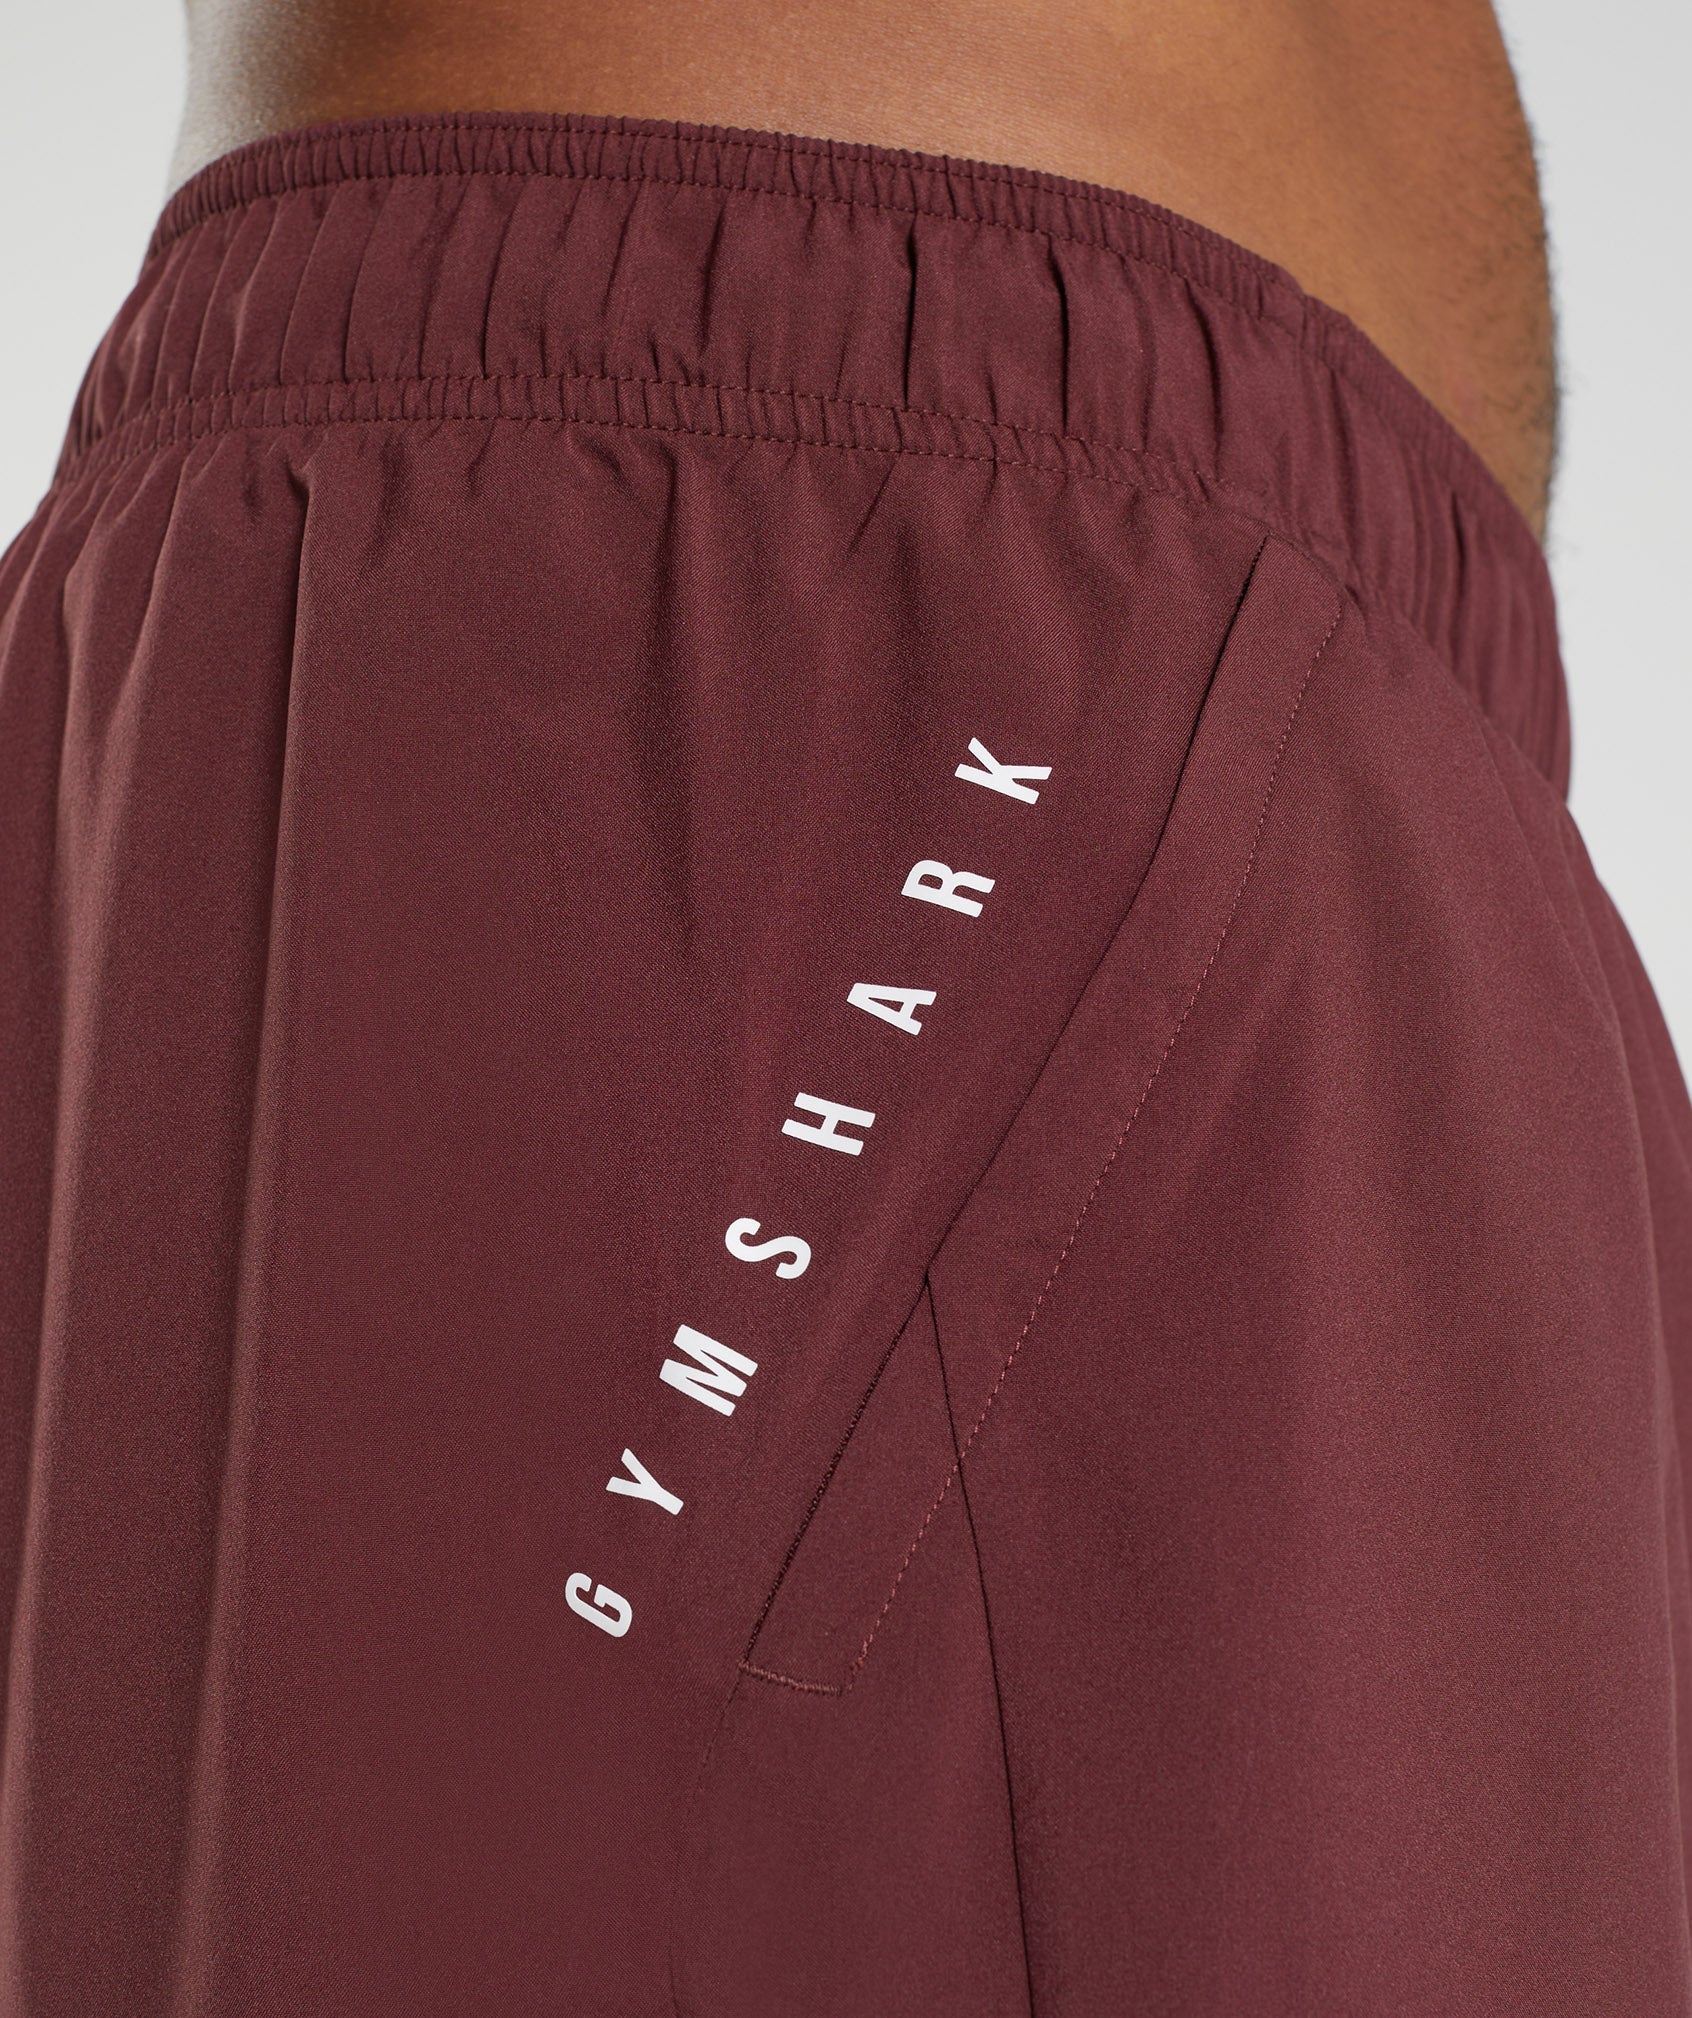 Sport 7" 2 In 1 Shorts in Baked Maroon/Salsa Red - view 5